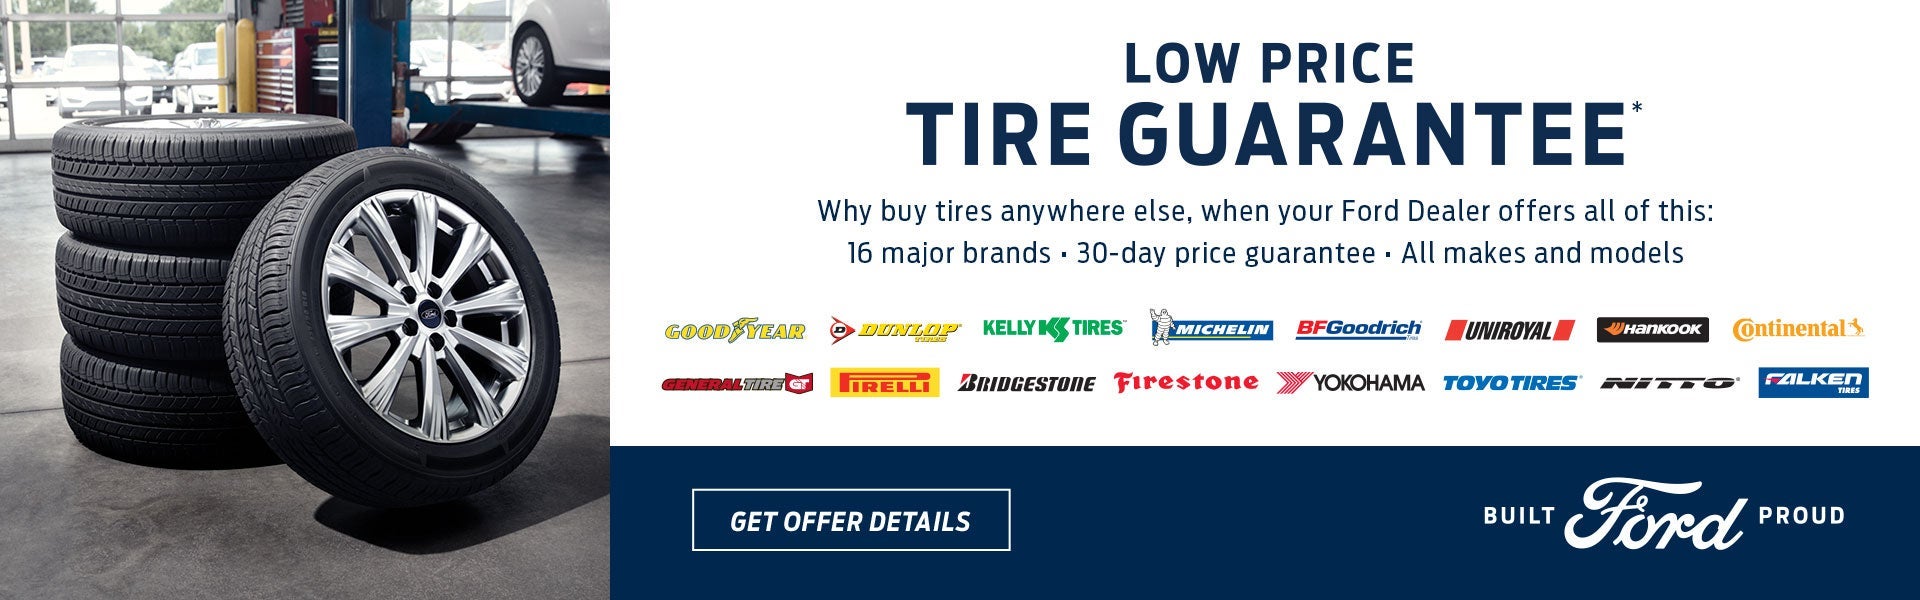 Low Price Tire Guarantee | Sarchione Ford of Randolph in Randolph OH